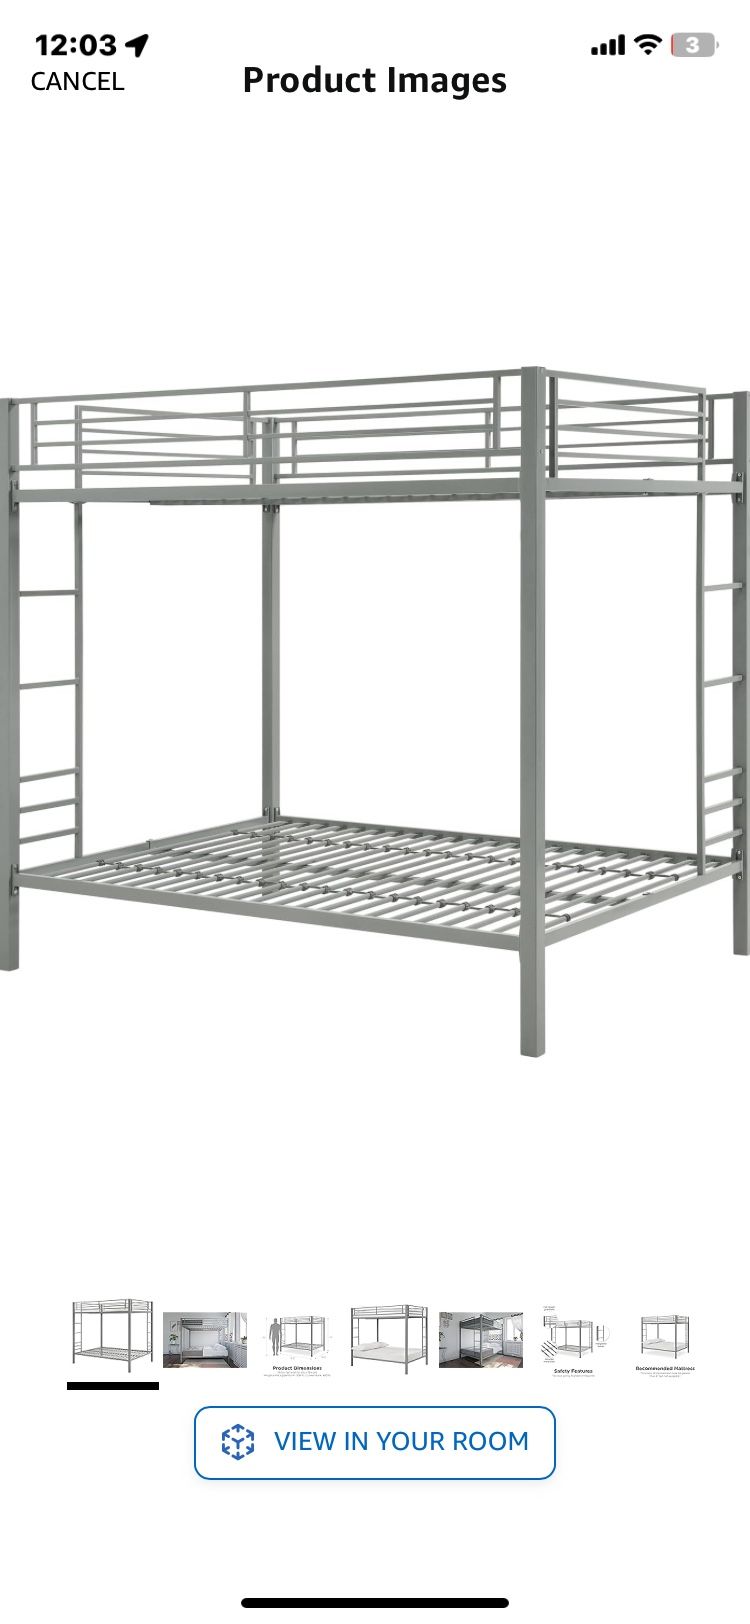 Brand New Full Size Bunk Bed Will Trade For Small Living Room T.V Stand W/ Fireplace 